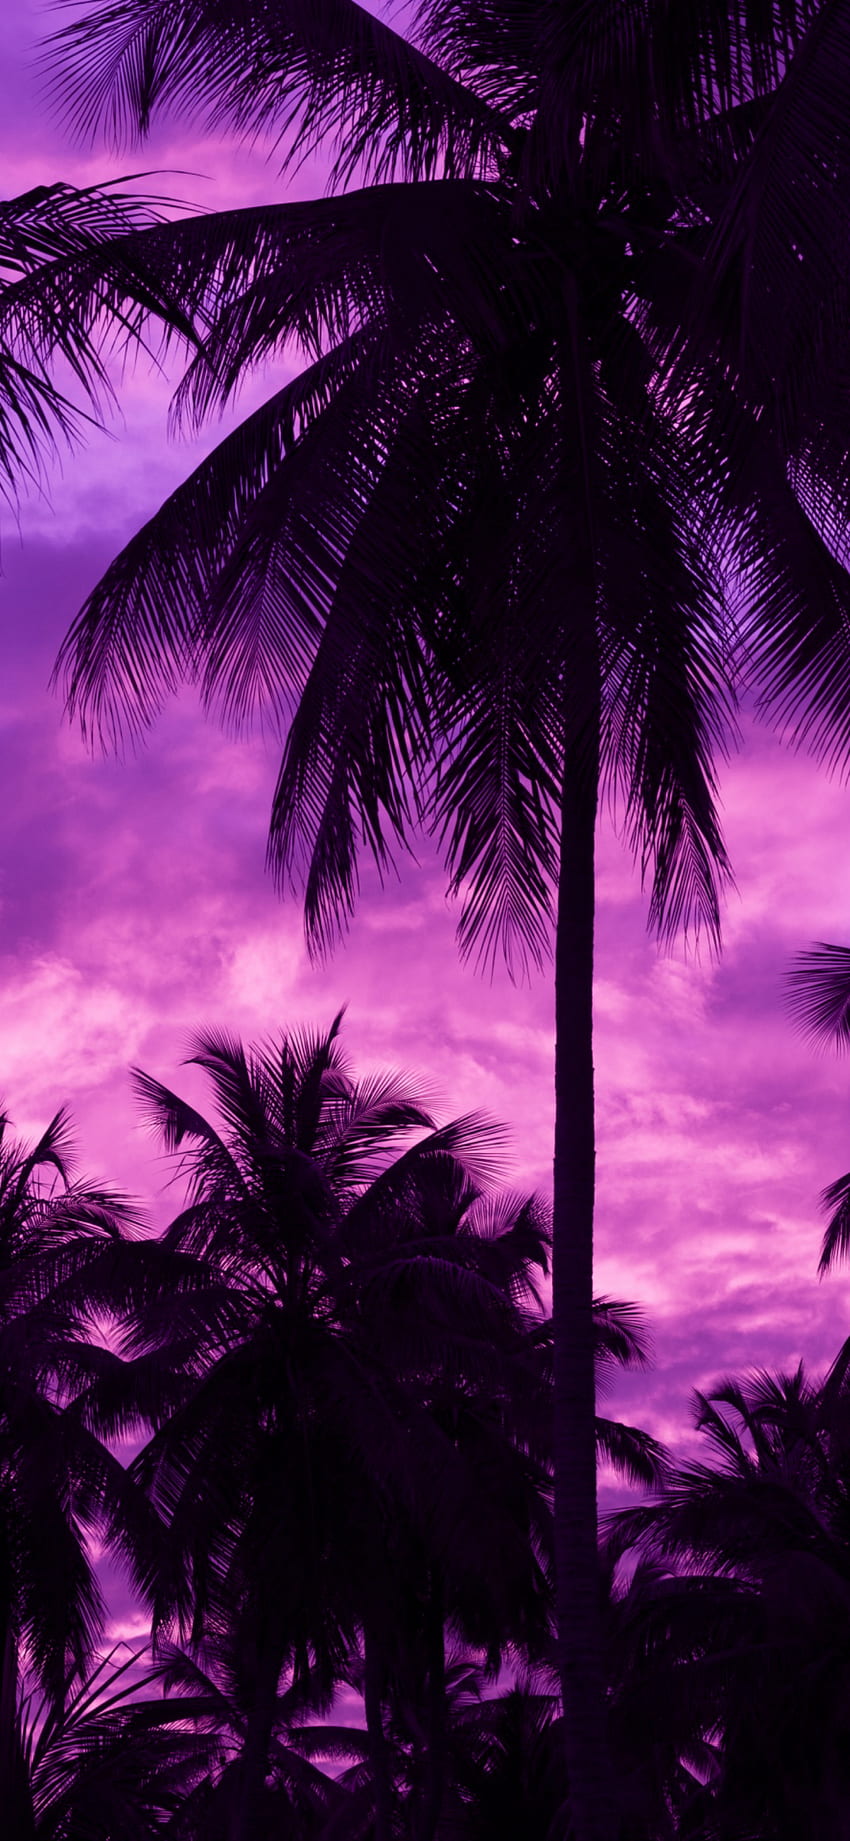 Purple Sky, Palm Trees, Dark for iPhone X - Maiden, Pink and Purple Sky HD phone wallpaper